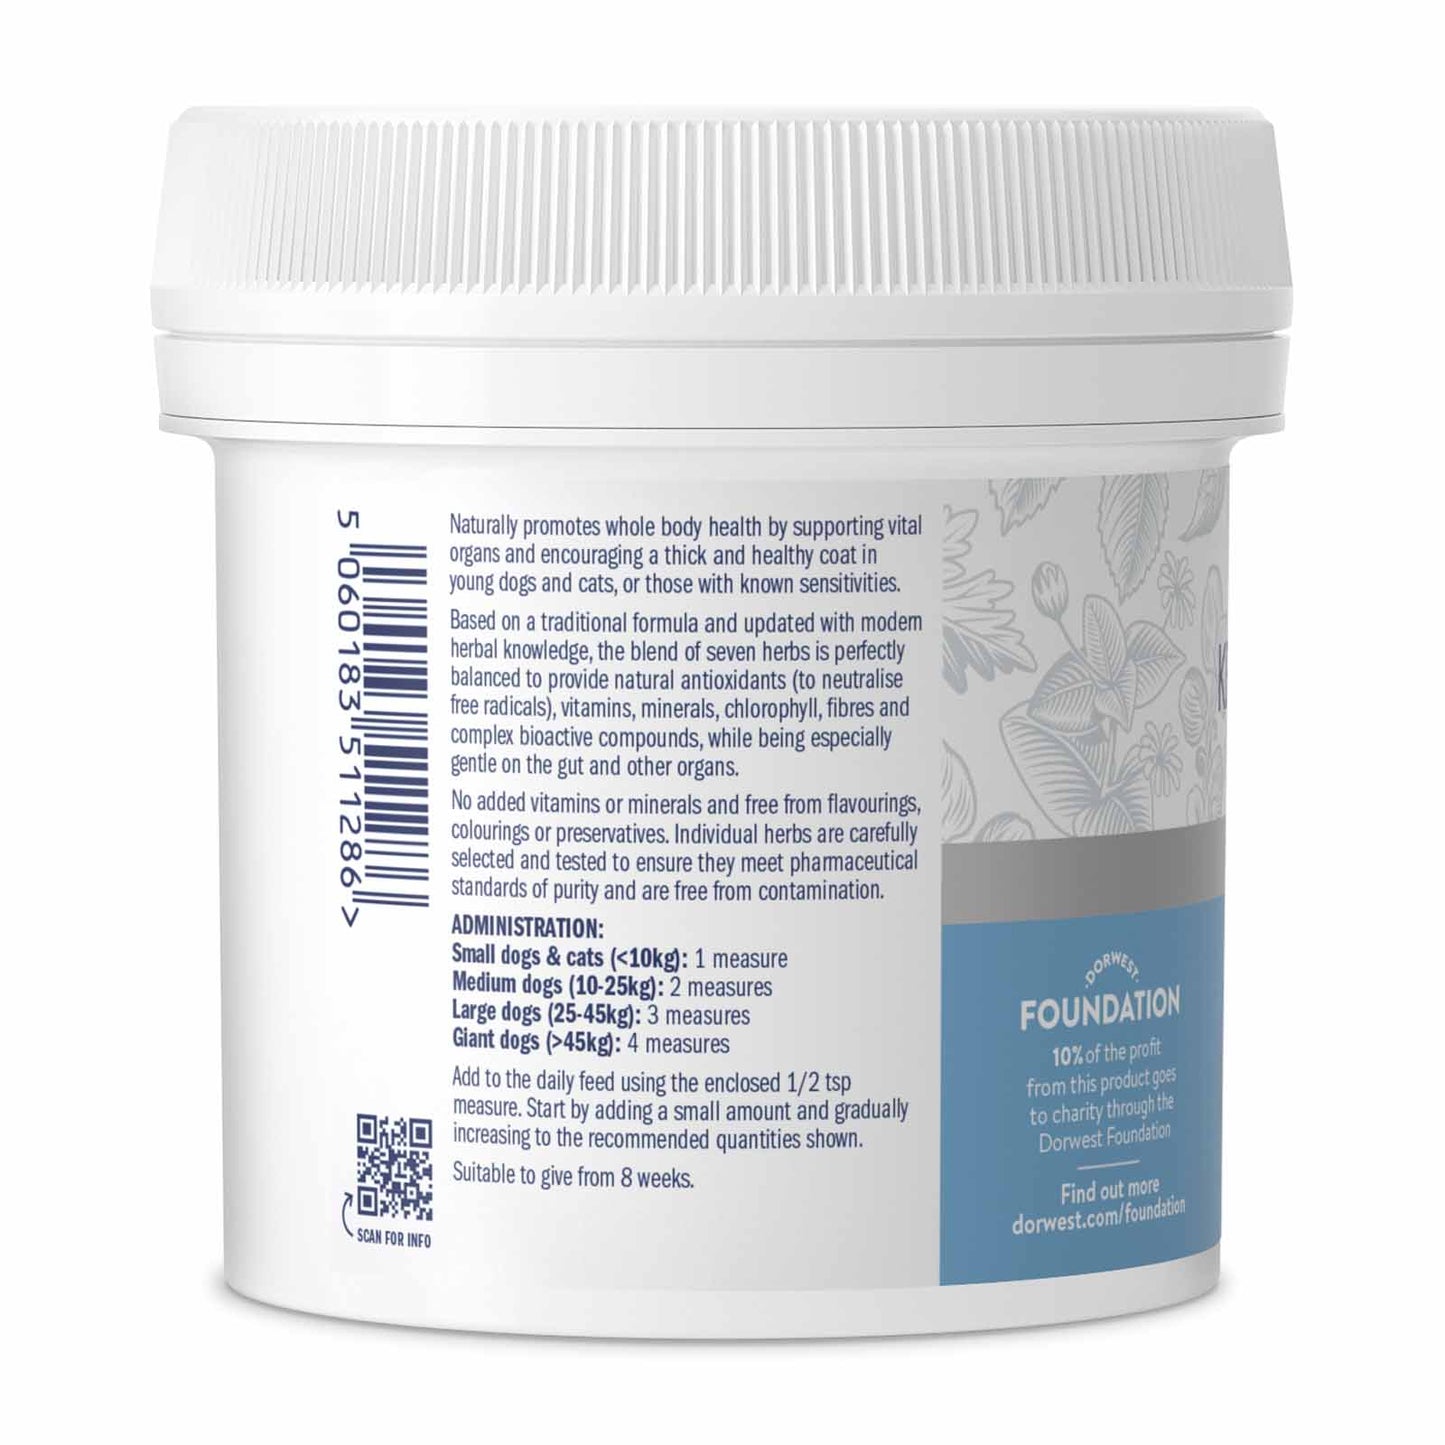 Dorwest Keeper's Mix (Sensitive) Powder For Dogs And Cats (Thick & Healthy Coat & Pigmentation & All-round Health Boost)